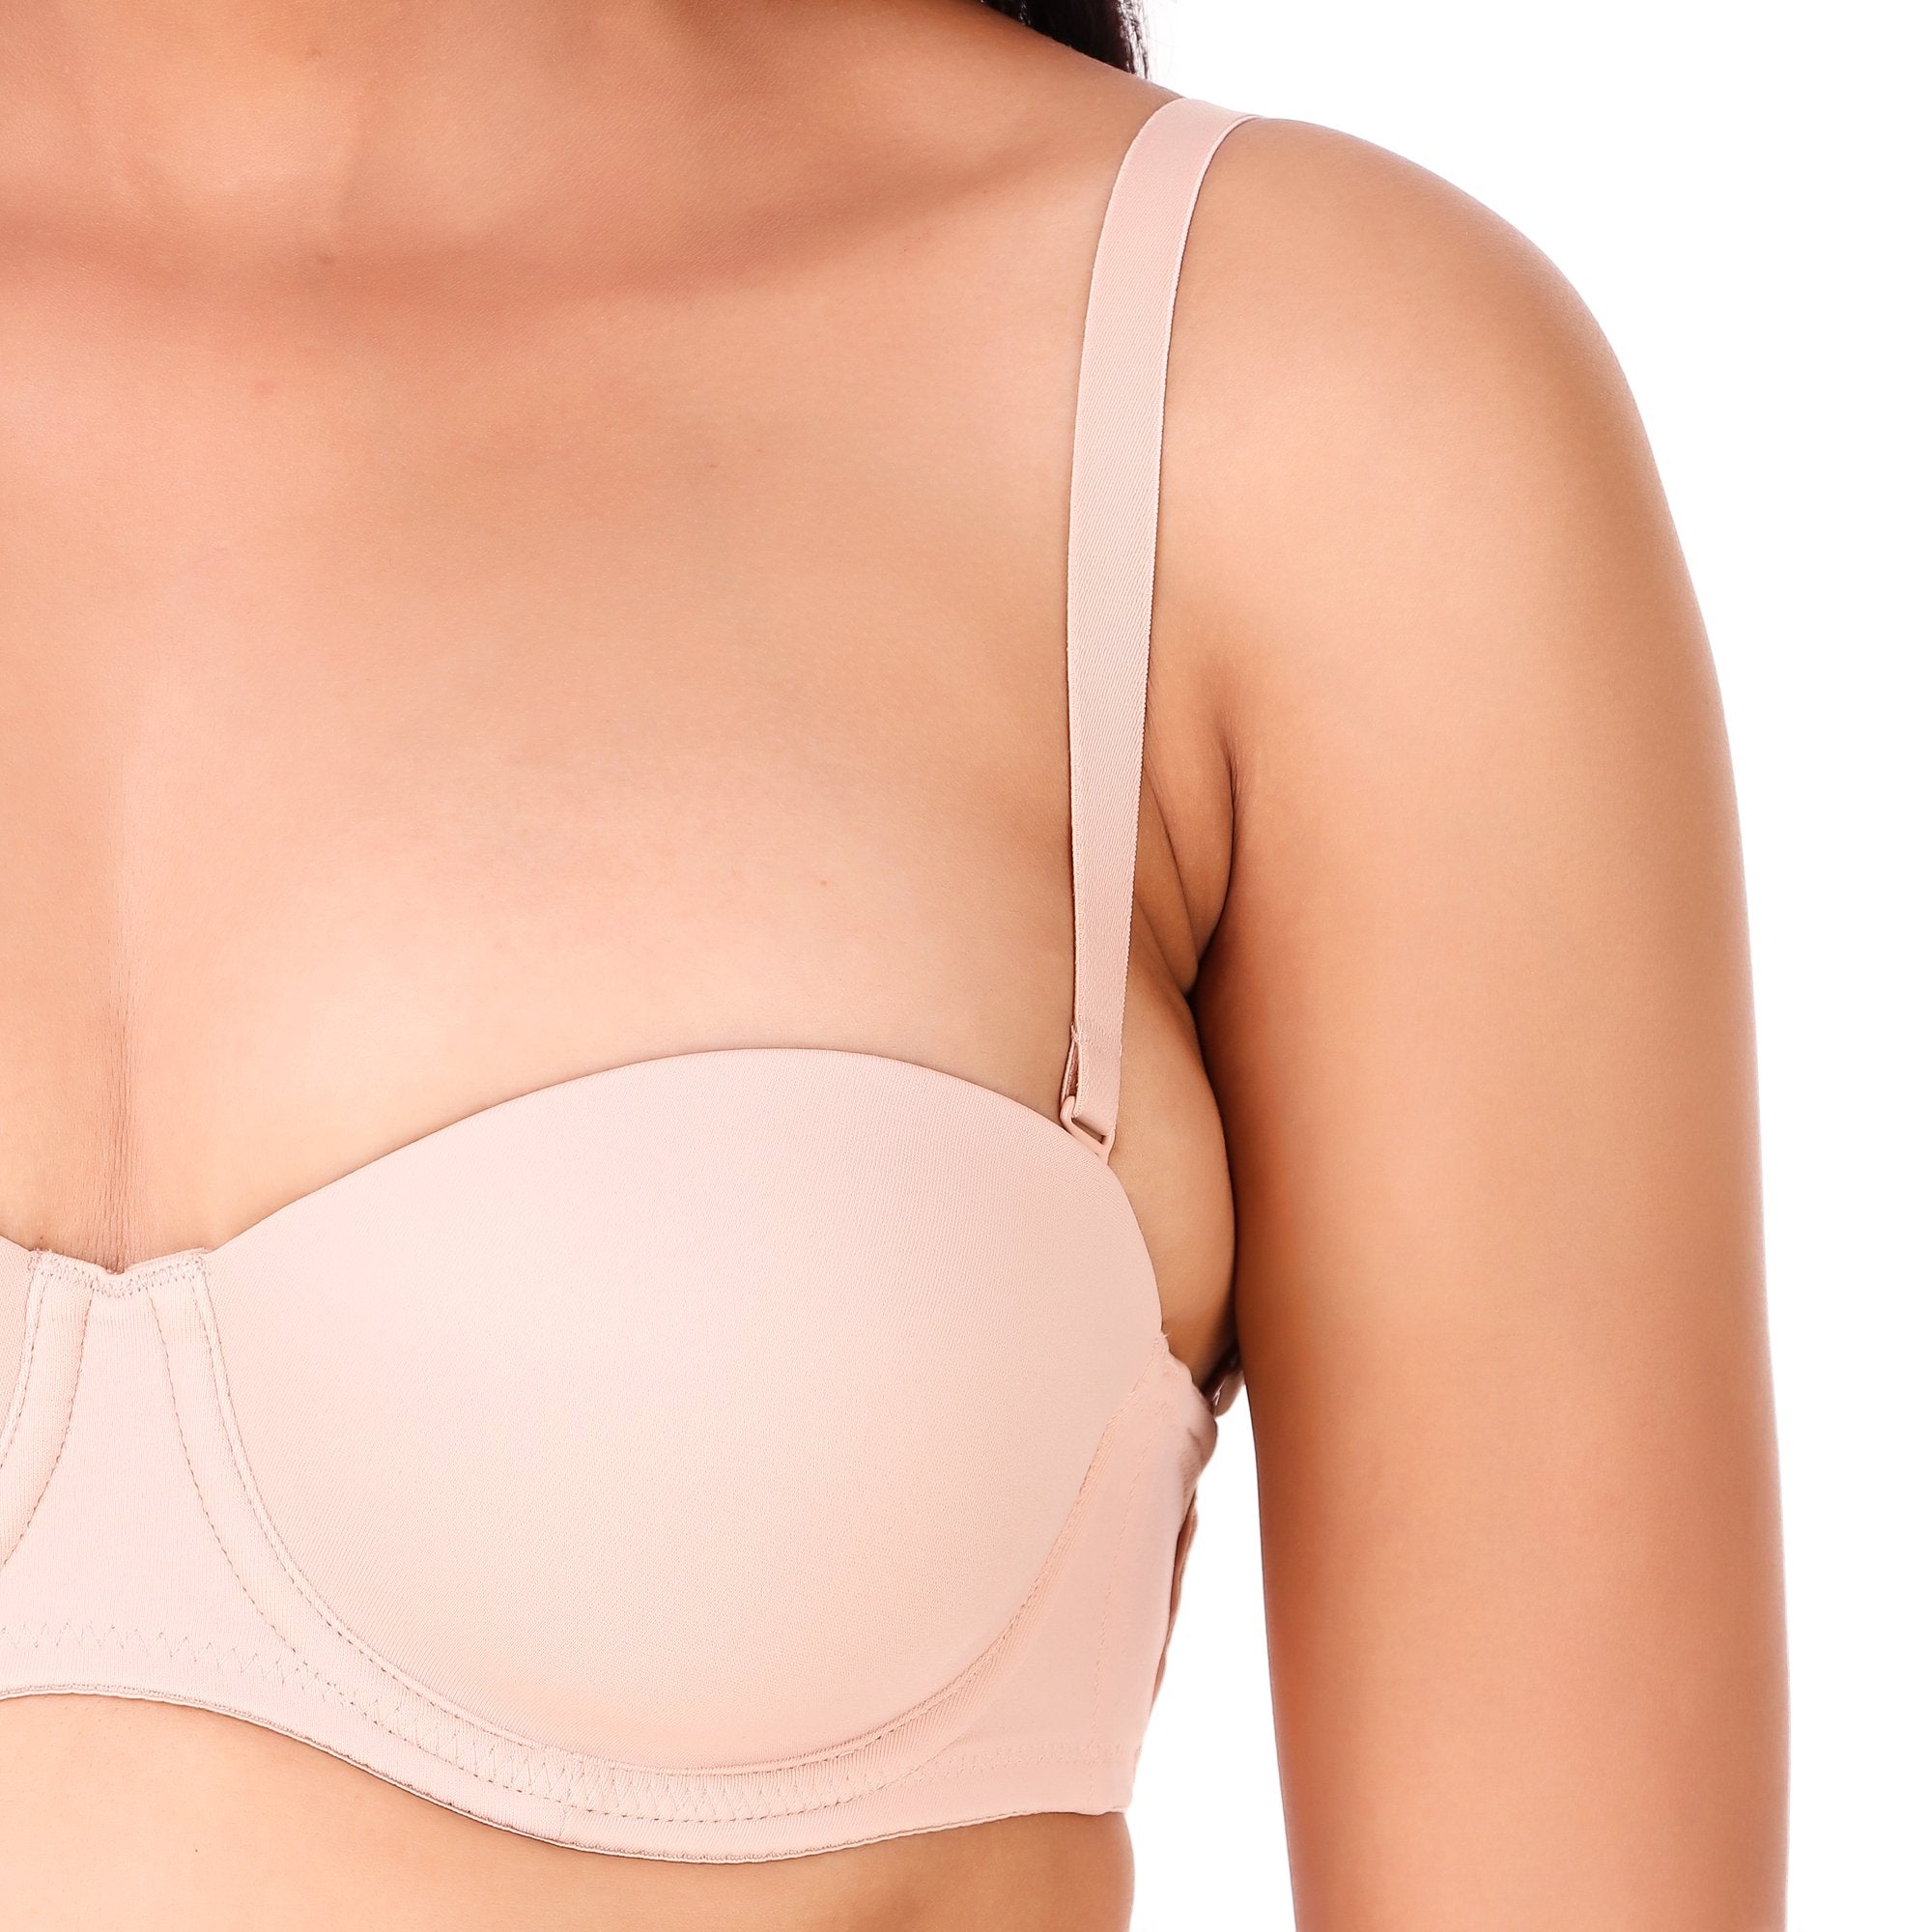 TRIUMPH-122I483  Invisible Wired Half Cup Padded Detachable Multioptional Transparent Backless Party Bra